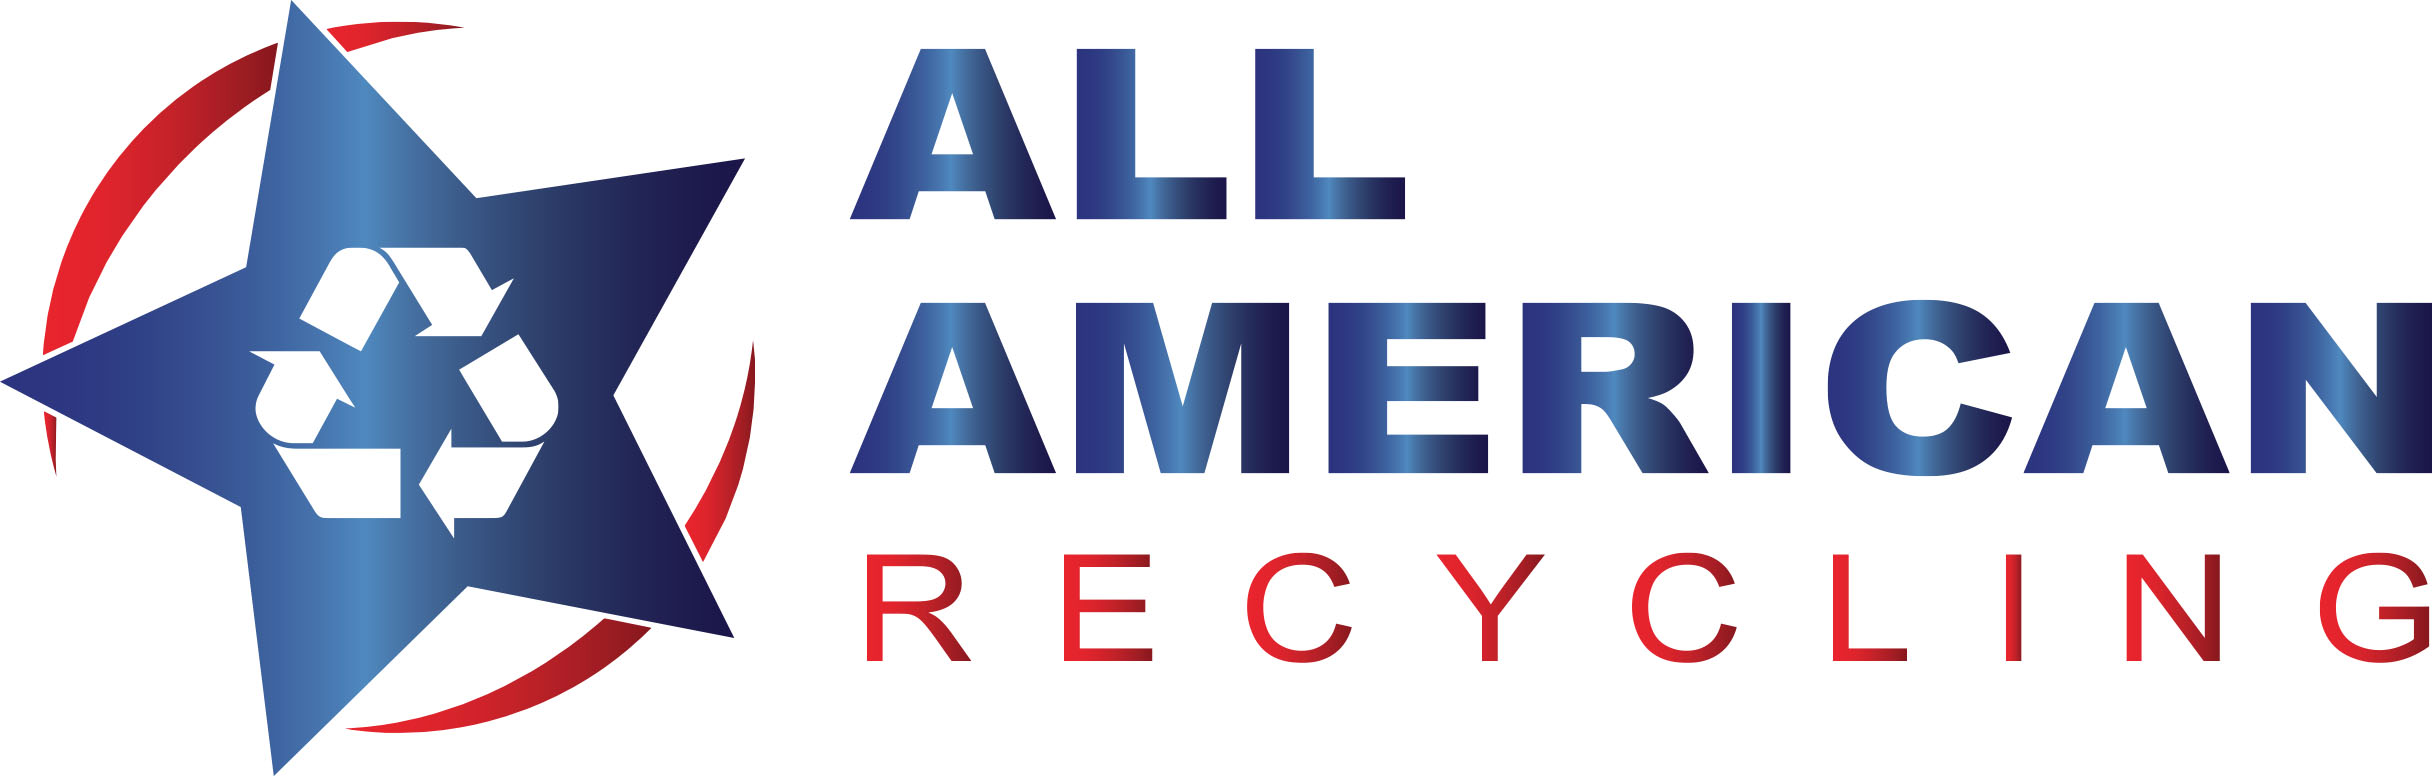 All American Recycling copy